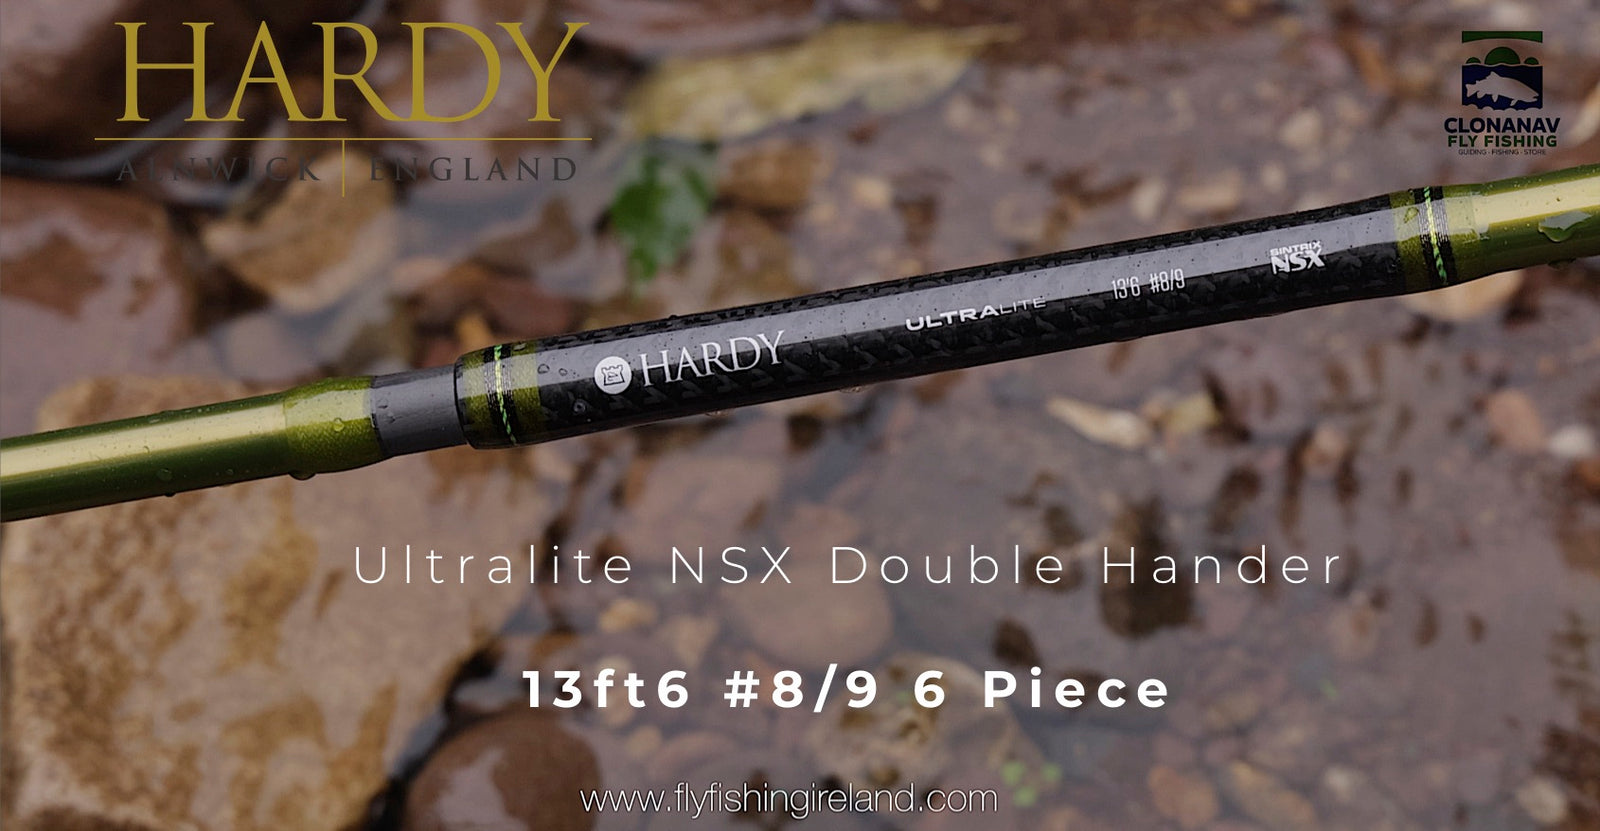 Hardy Ultralite NSX DH Rod Review